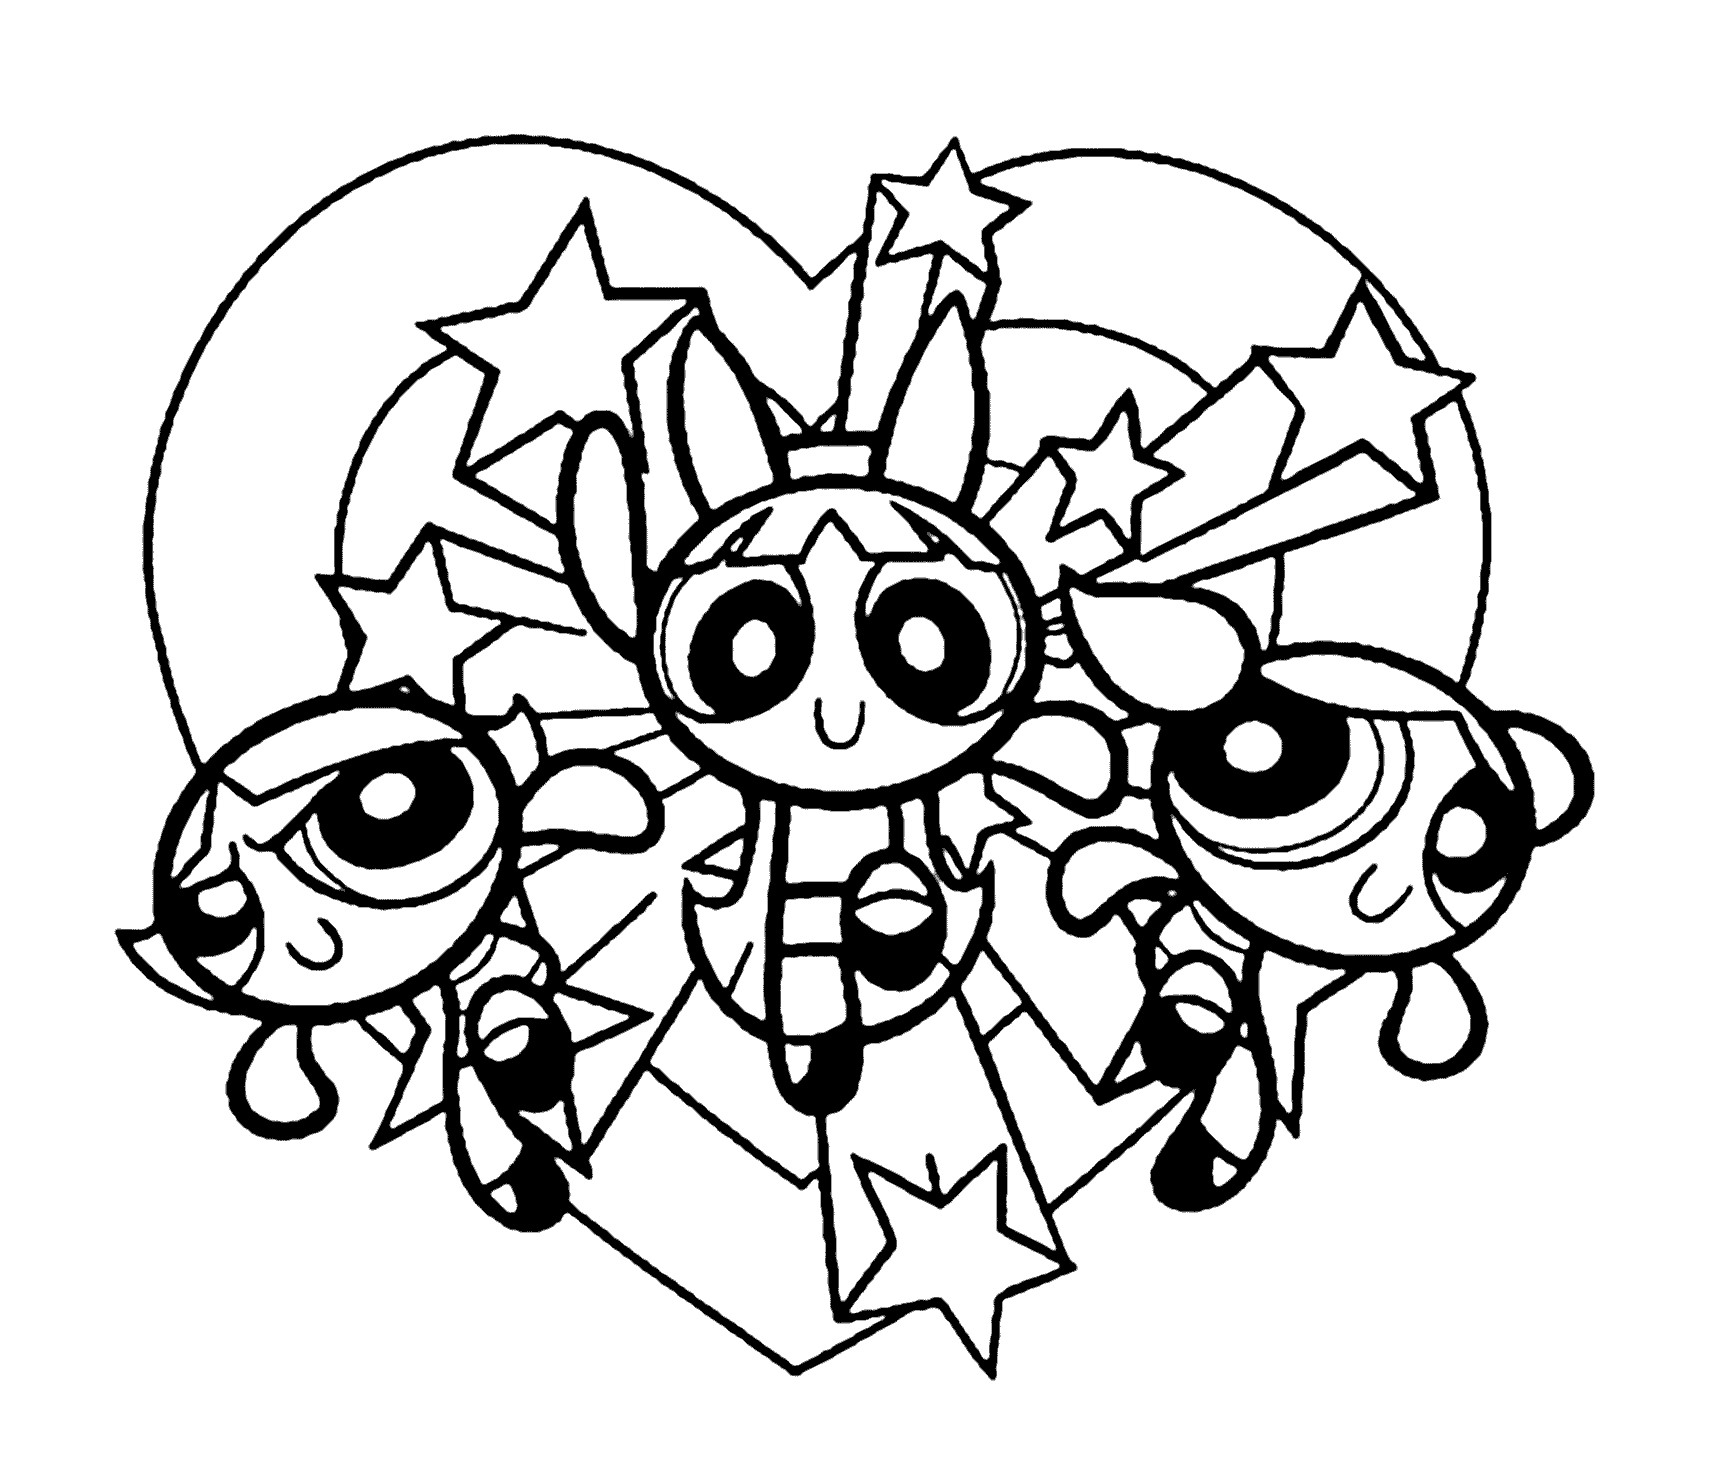 Powerpuff Girls Coloring Book
 Cool Powerpuff girls on vacation coloring pages for kids